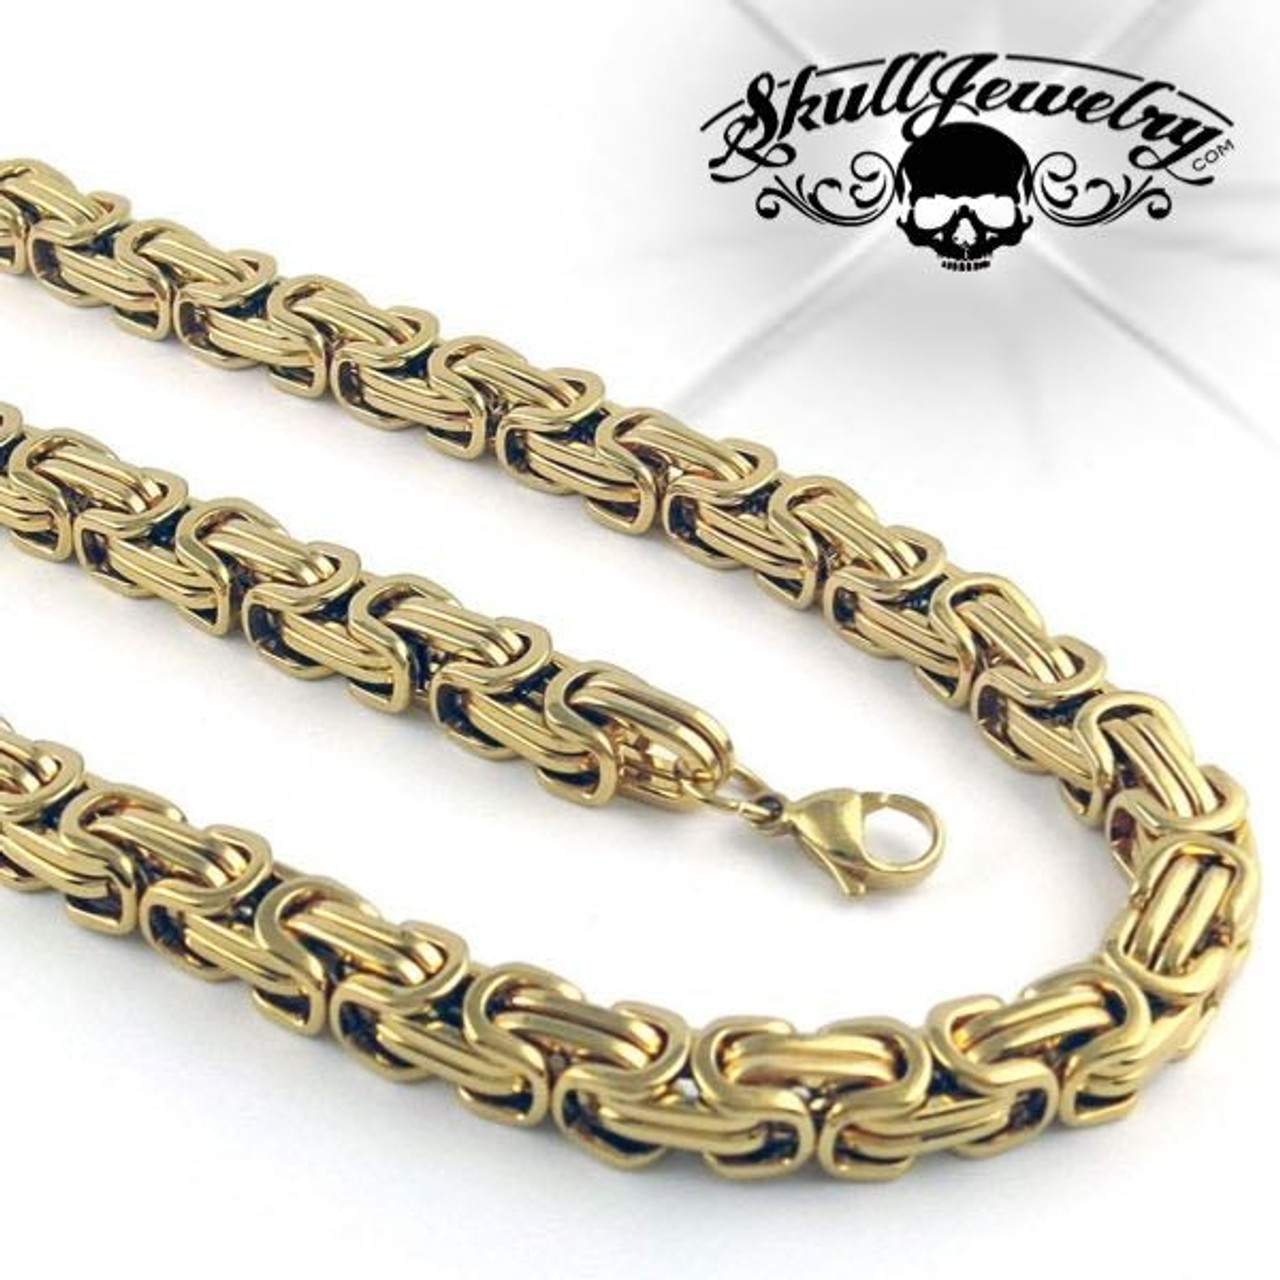 9ct Yellow Gold Byzantine Chain Necklace - London Road Jewellery